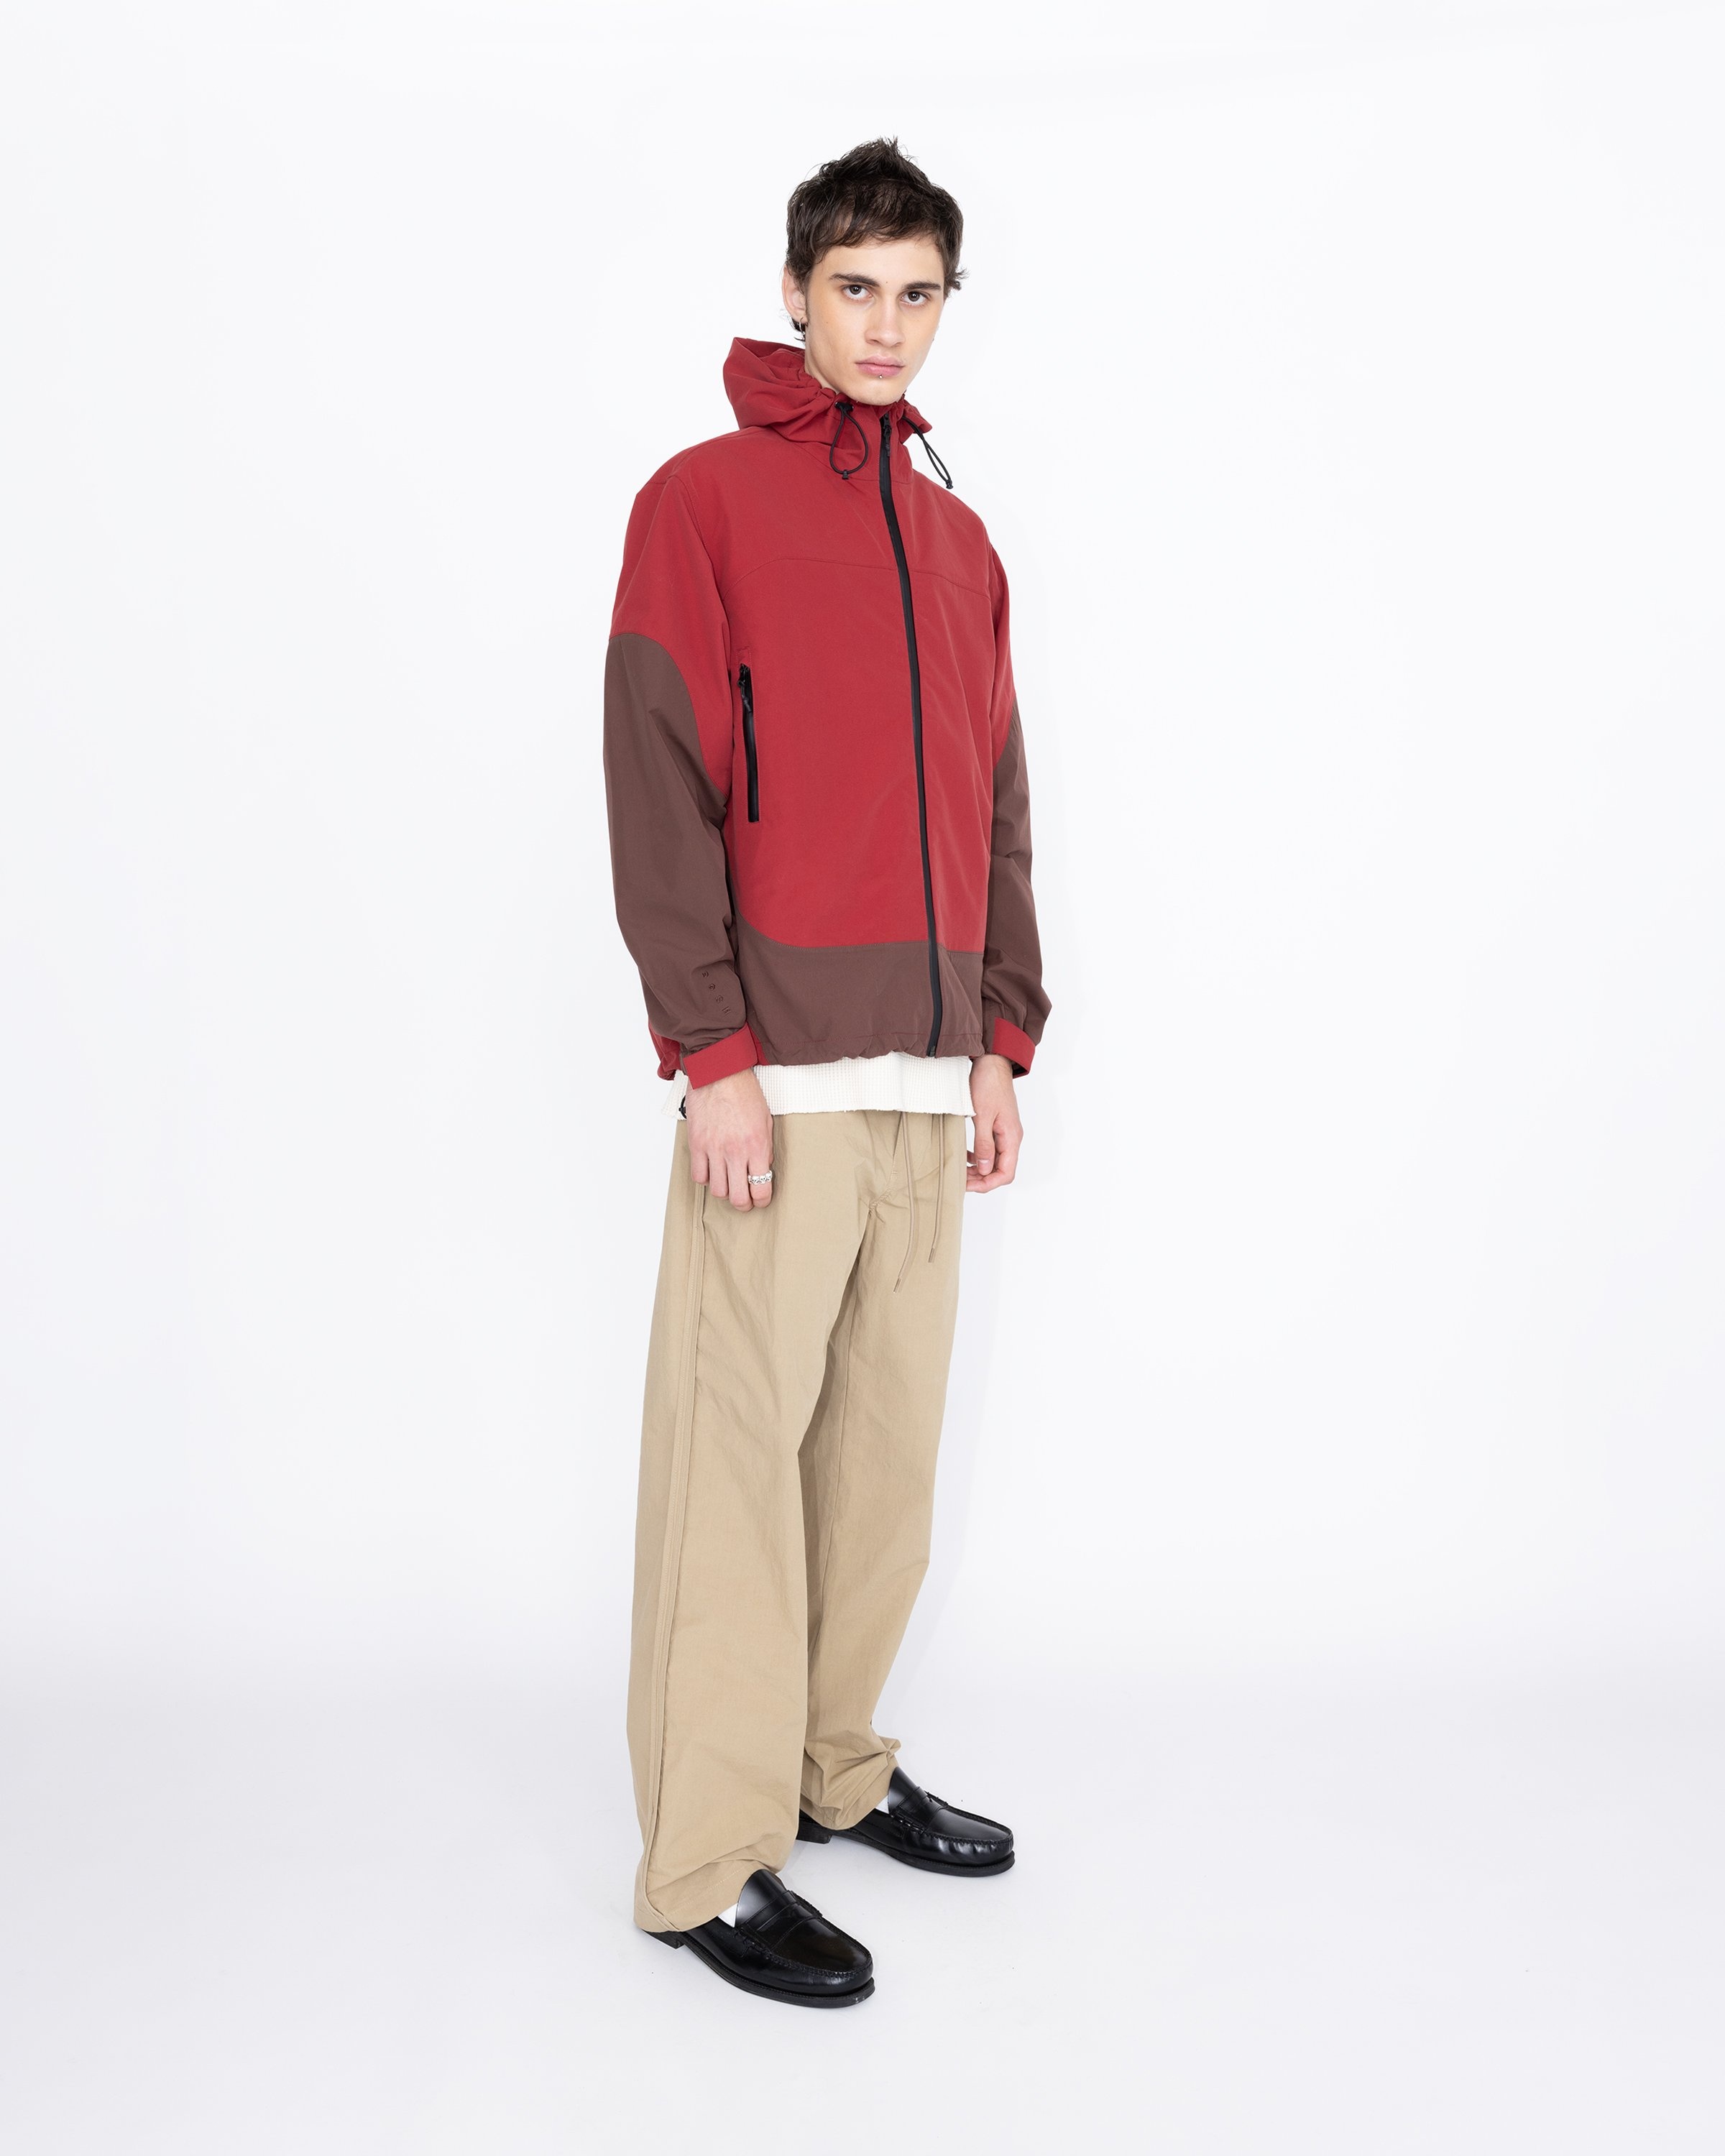 Highsnobiety HS05 – 3 Layer Taped Nylon Jacket Ruby - Outerwear - Red - Image 4